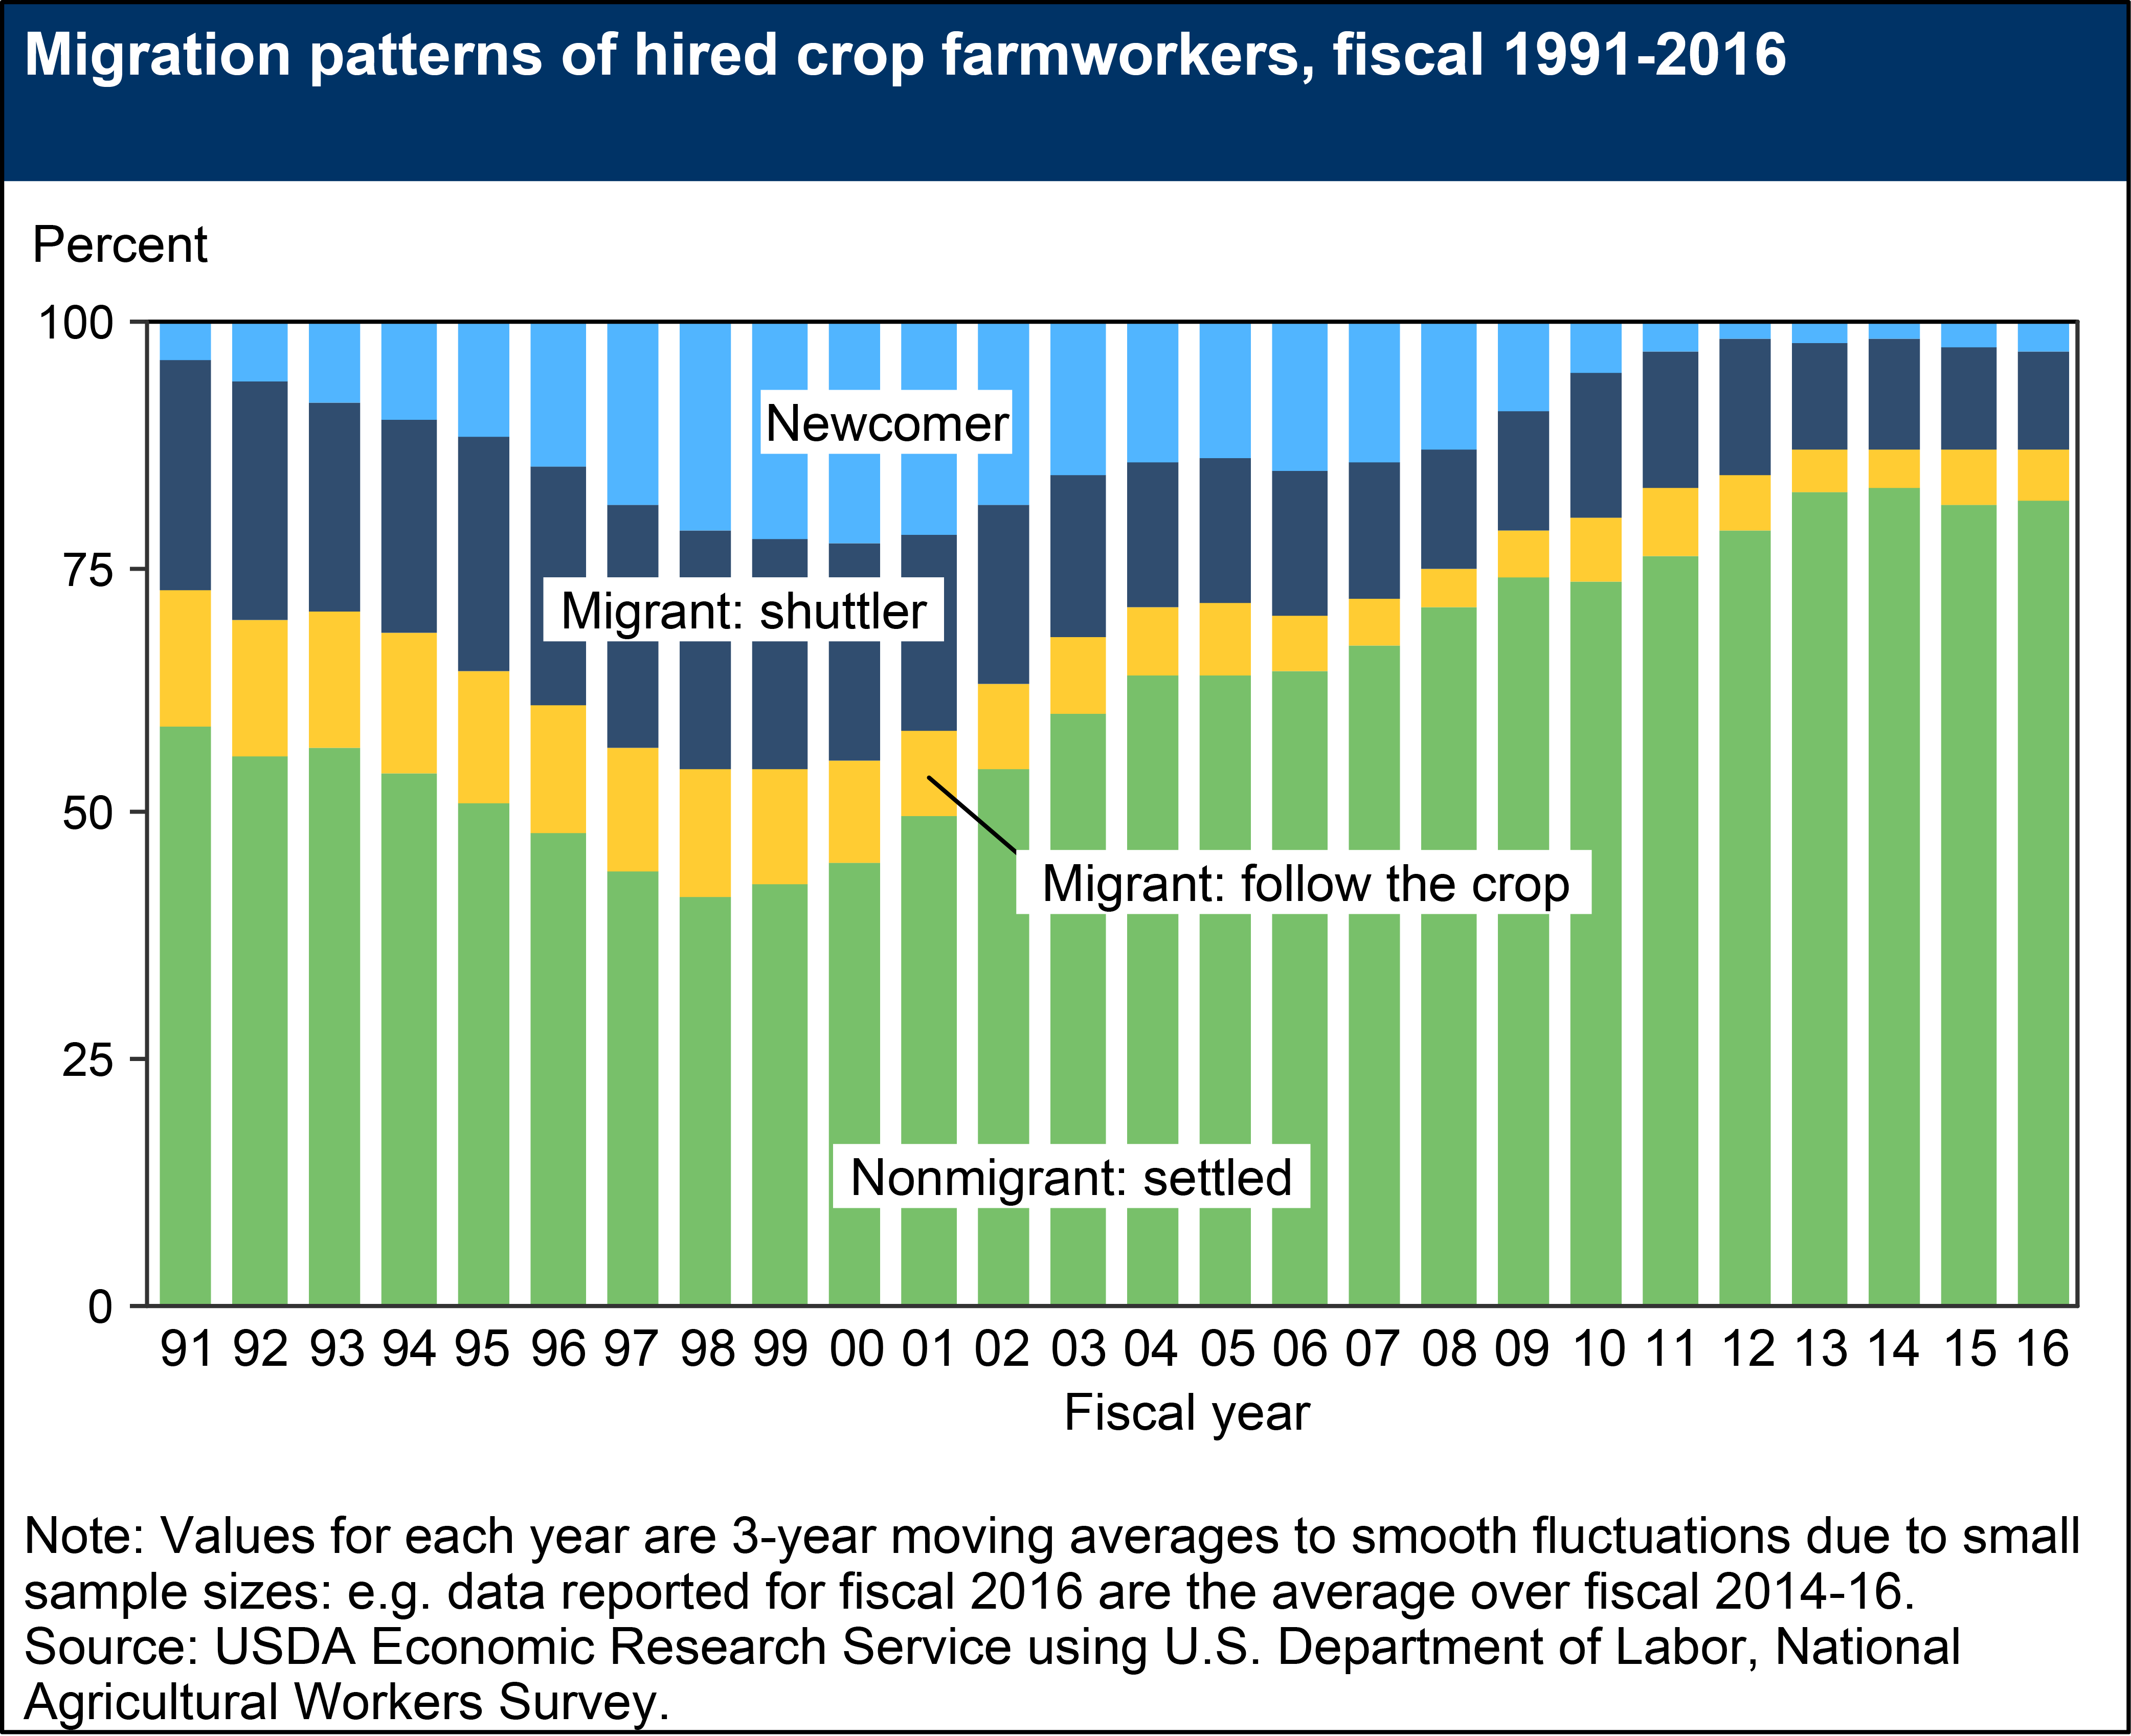 Graph of Migration Patterns of Hired Crop Farmworkers from fiscal year 1991 to 2016